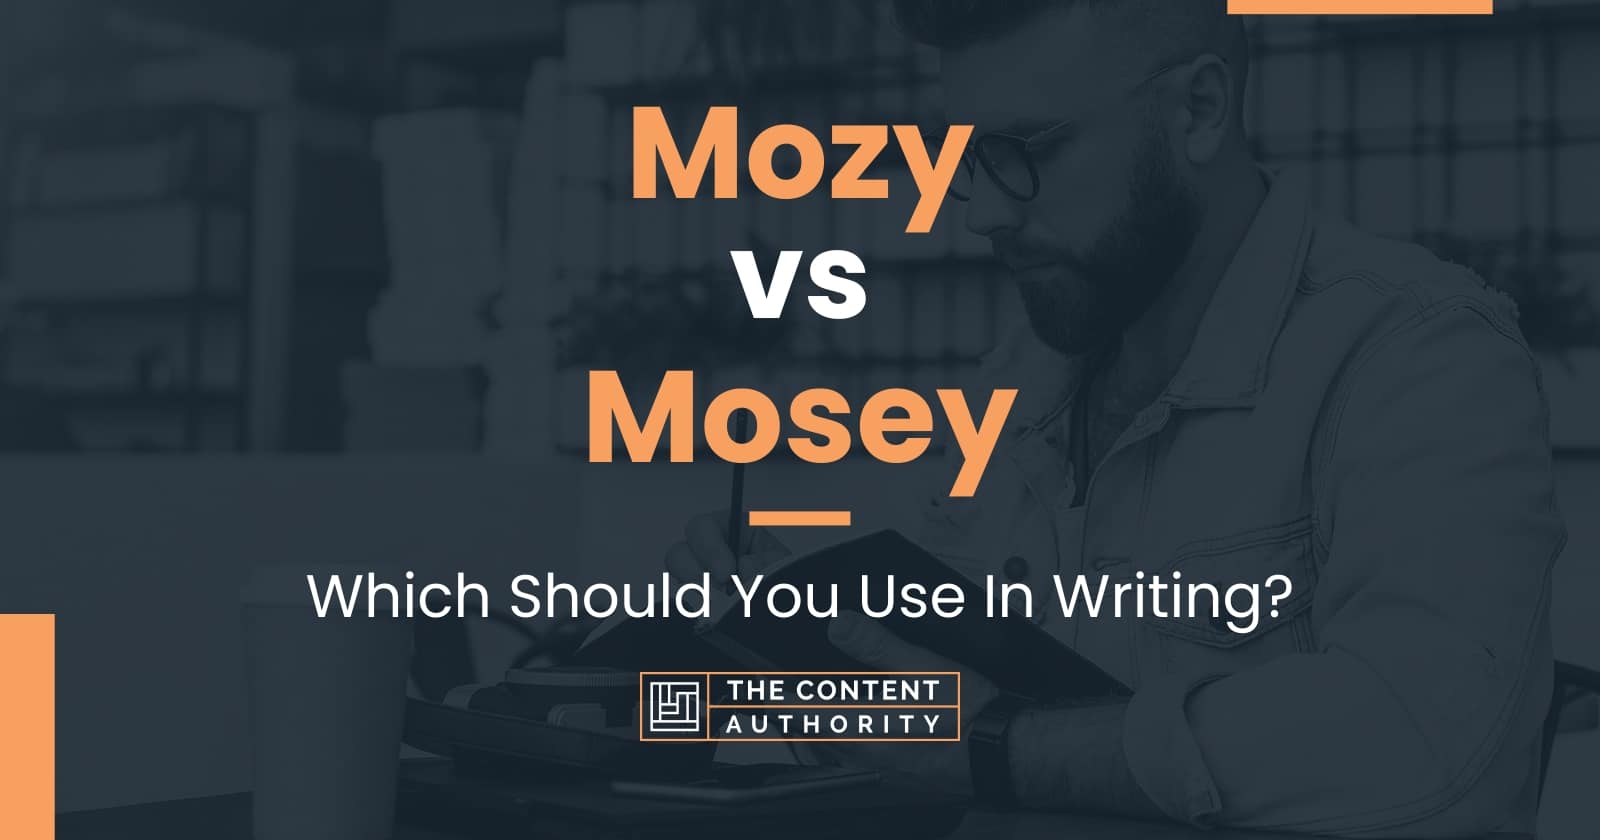 Mozy vs Mosey: Which Should You Use In Writing?